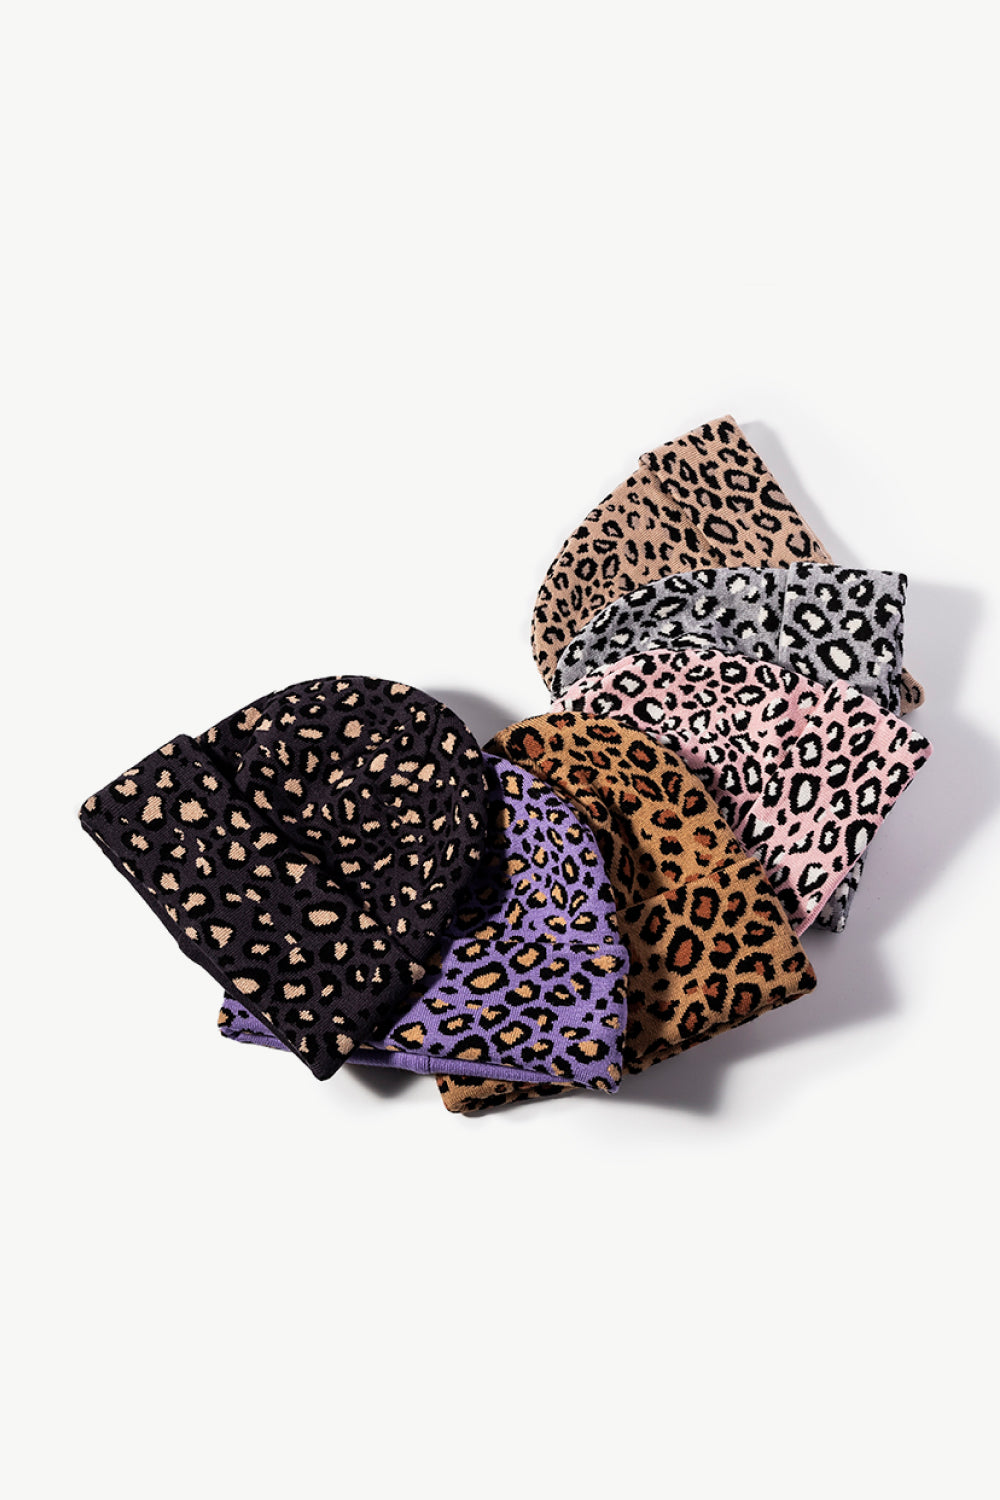 Load image into Gallery viewer, Leopard Pattern Cuffed Beanie
